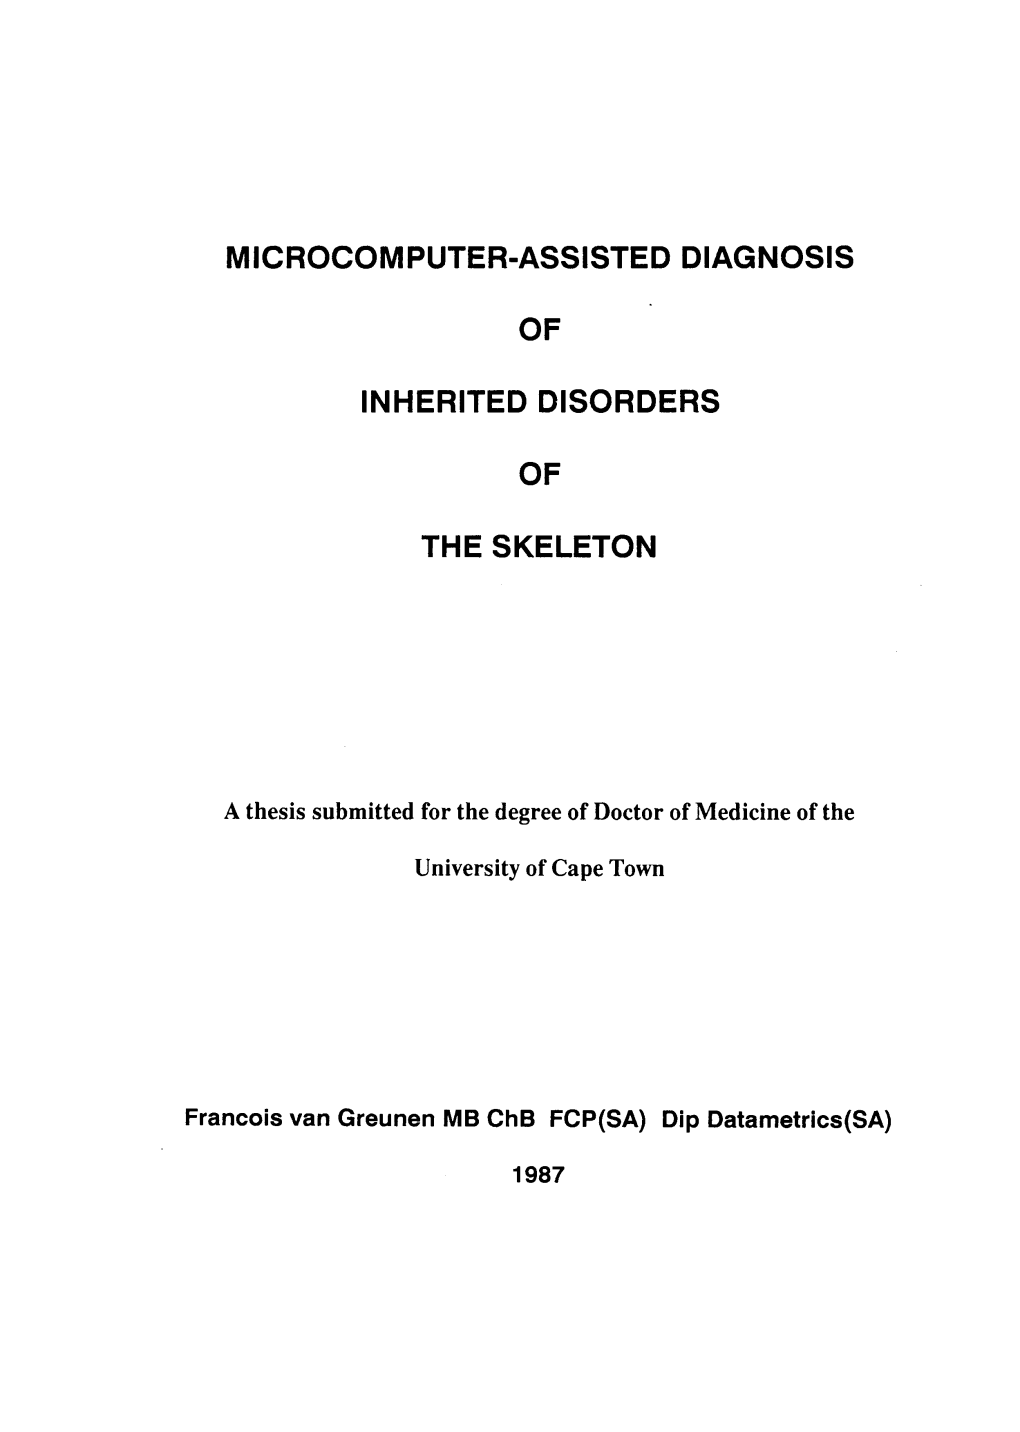 Microcomputer-Assisted Diagnosis of Inherited Disorders of the Skeleton